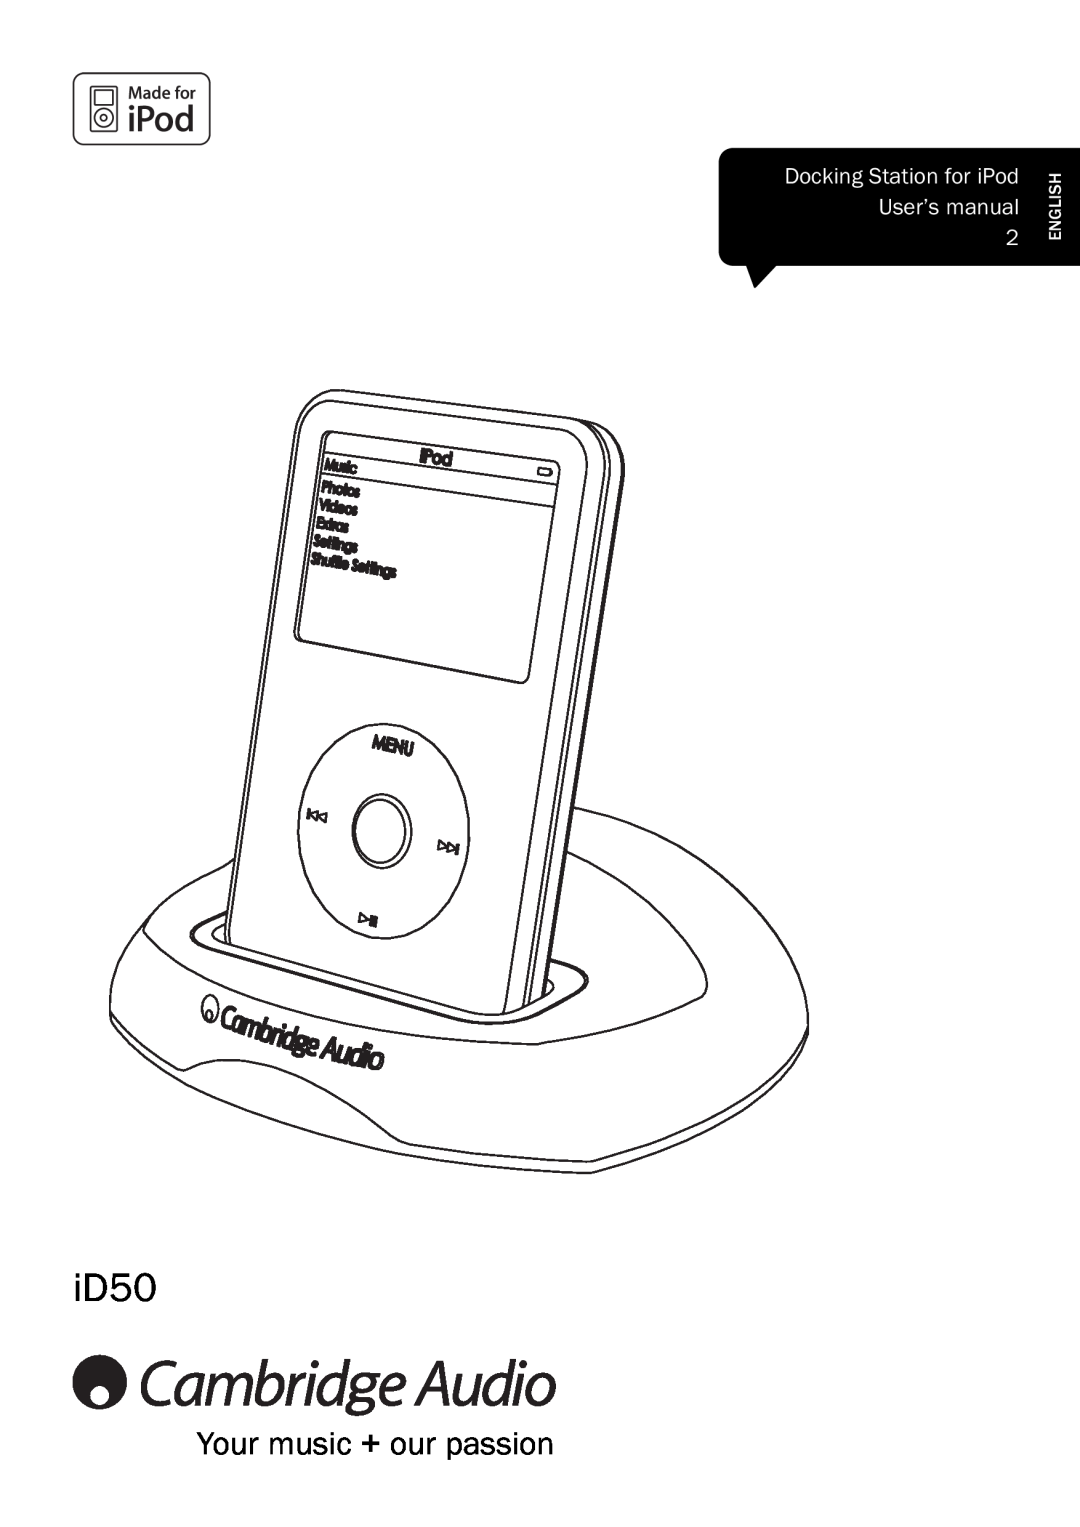 Cambridge Audio iD50 user manual English, Your music + our passion, Docking Station for iPod User’s manual 